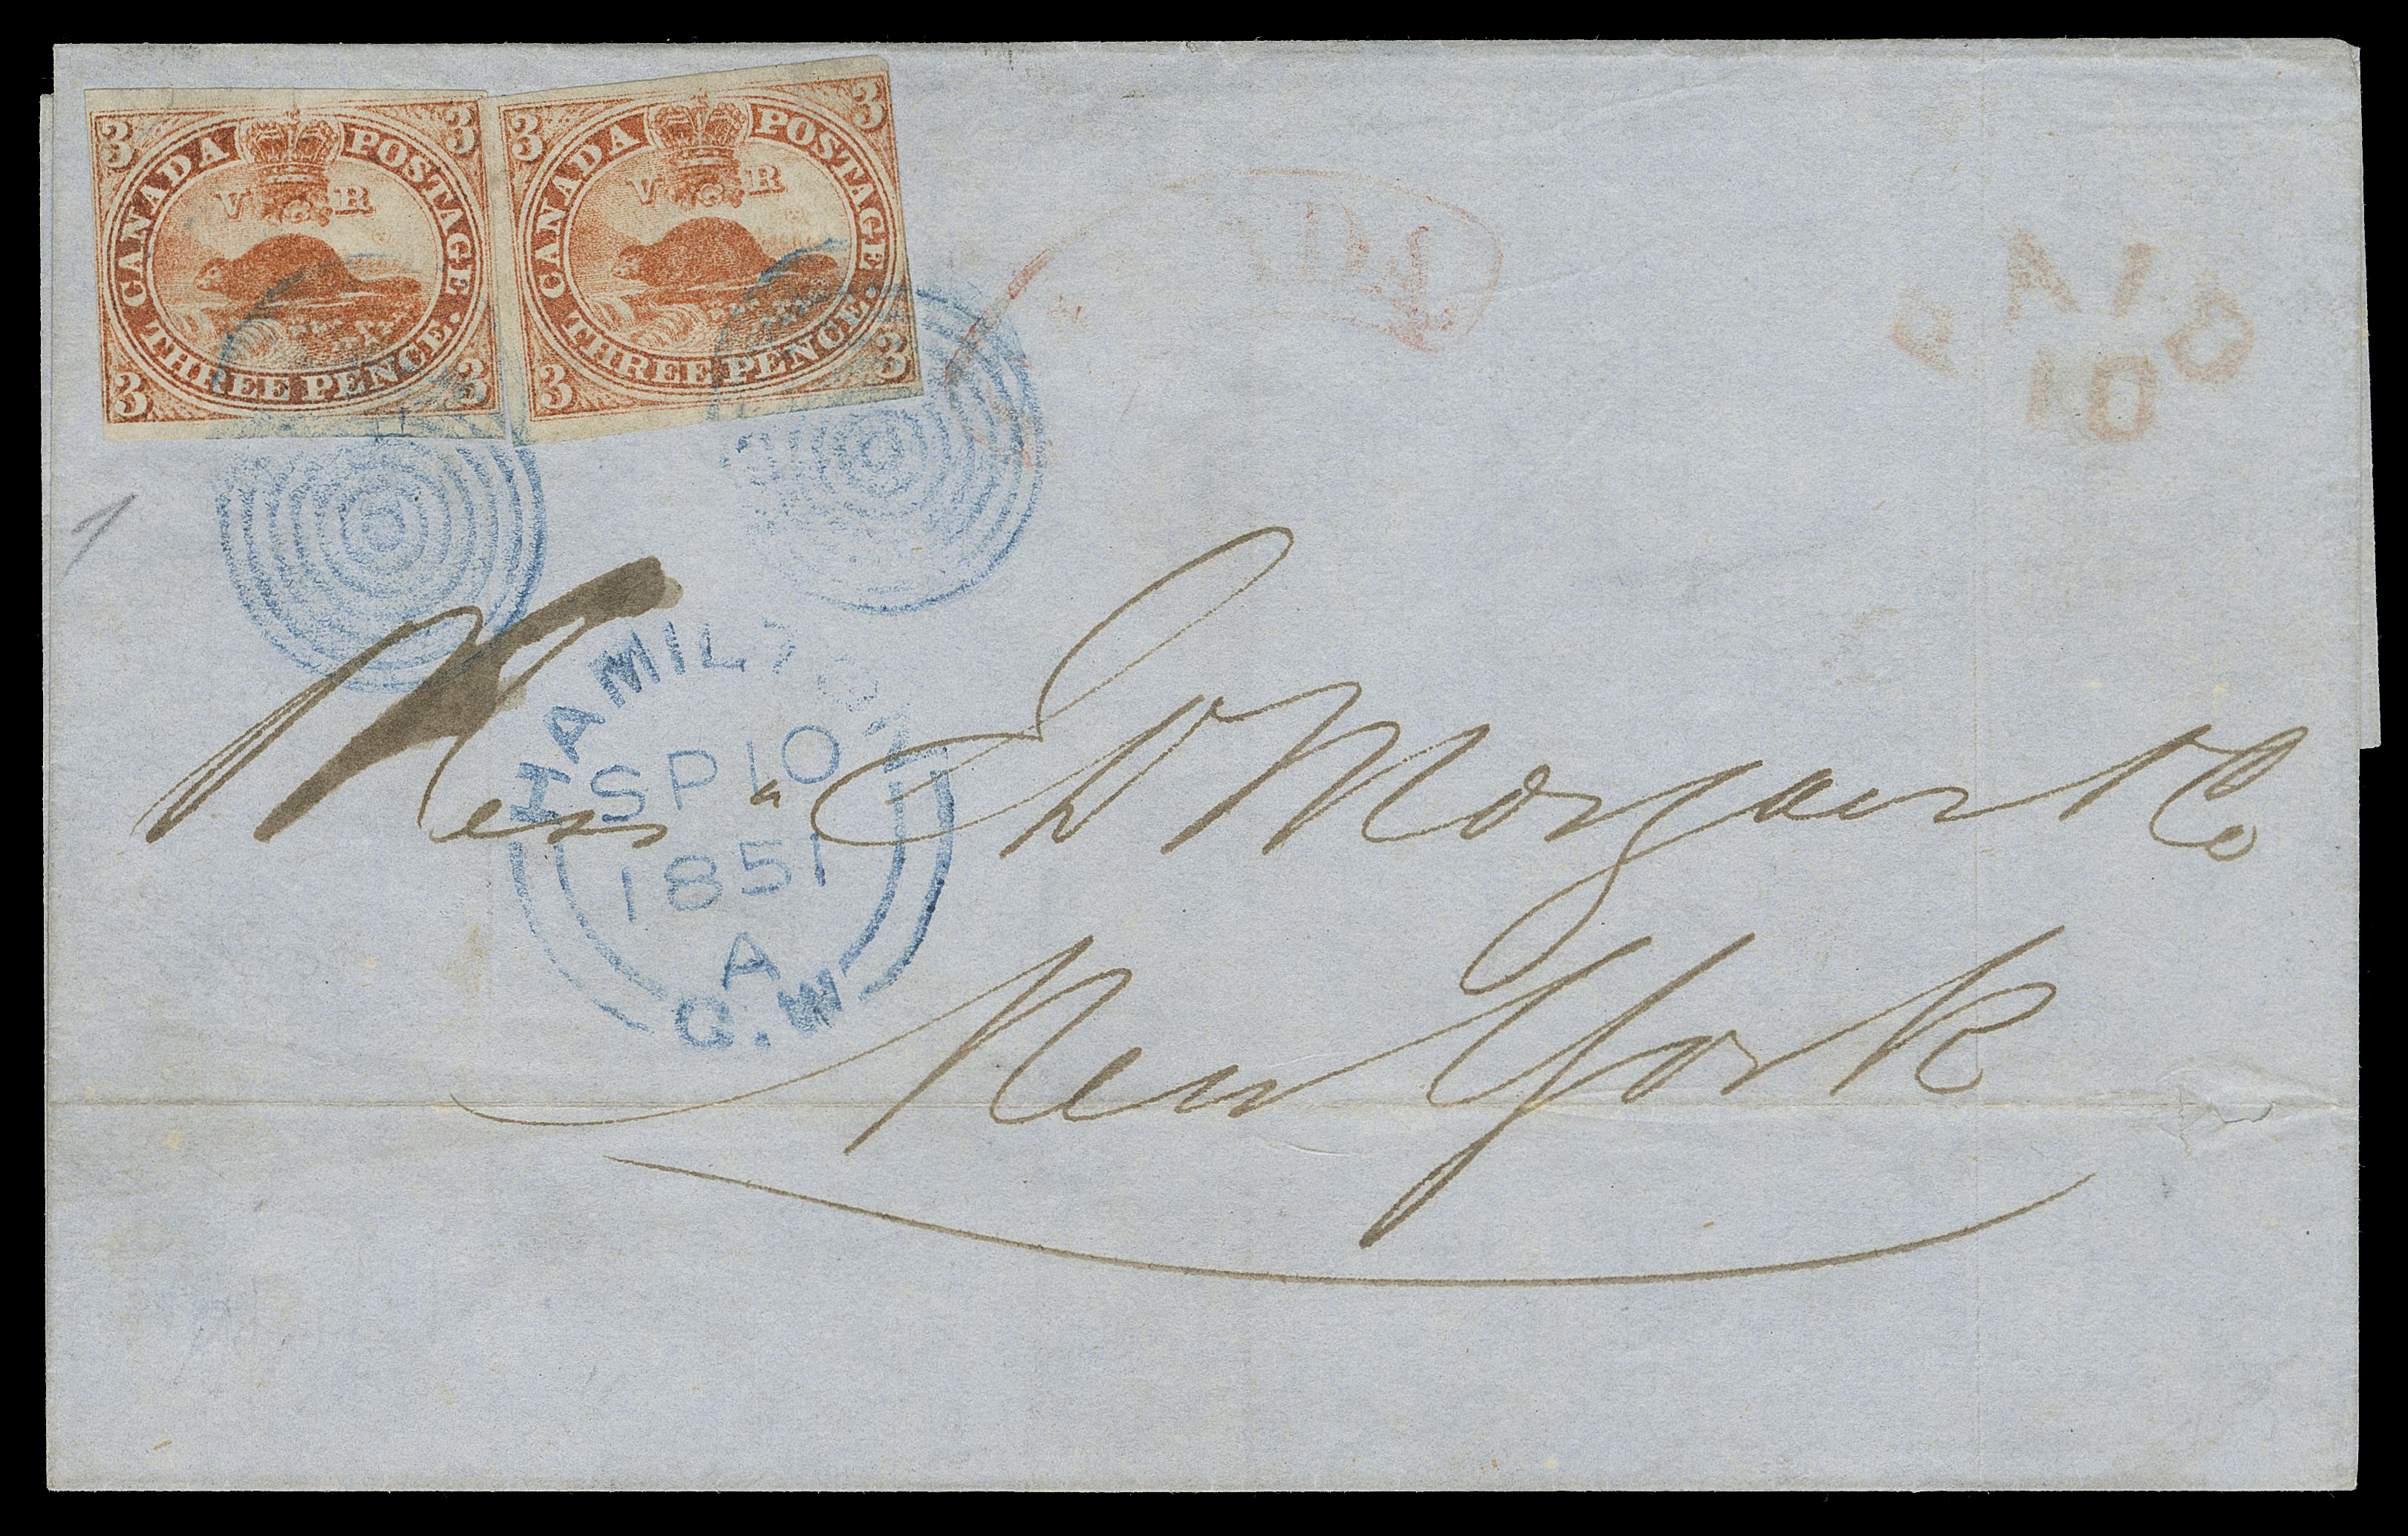 THREE PENCE AND FIVE CENTS  1851 (September 10) Blue folded cover from Hamilton to New York, bearing two singles of the 3p orange red shade on handmade laid paper with prominent laid lines, just clear to large margins, small sealed tear at upper left of left stamp, both tied by superb, visually striking concentric rings IN BLUE with same-ink Hamilton double arc dispatch, light arc CANADA and PAID / 10 border exchange handstamps in red. A very scarce usage of the 3p Beaver paying the 6p rate to the US, F-VF (Unitrade 1a)